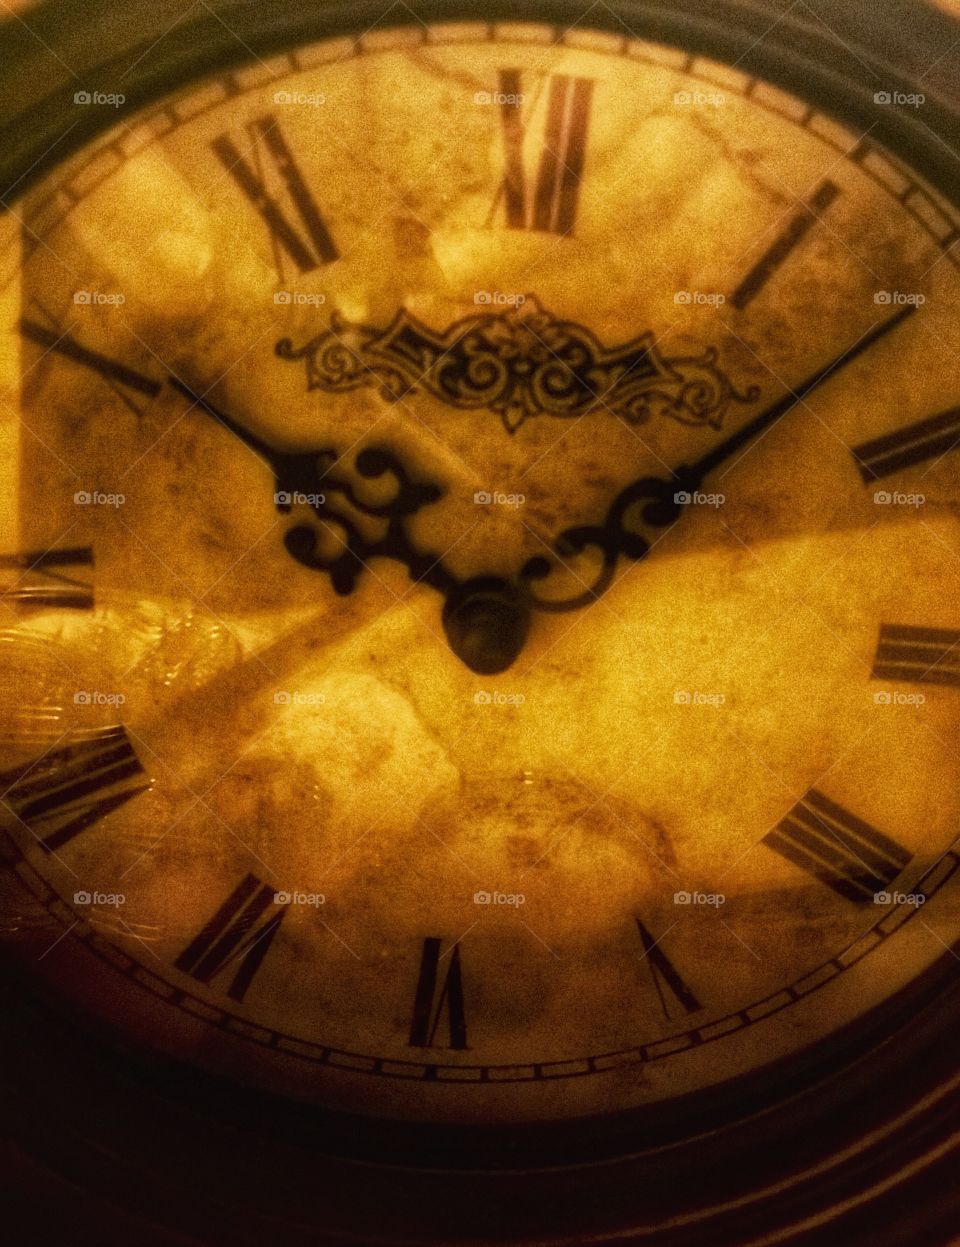 Vintage antique clock photographed in my bedroom 